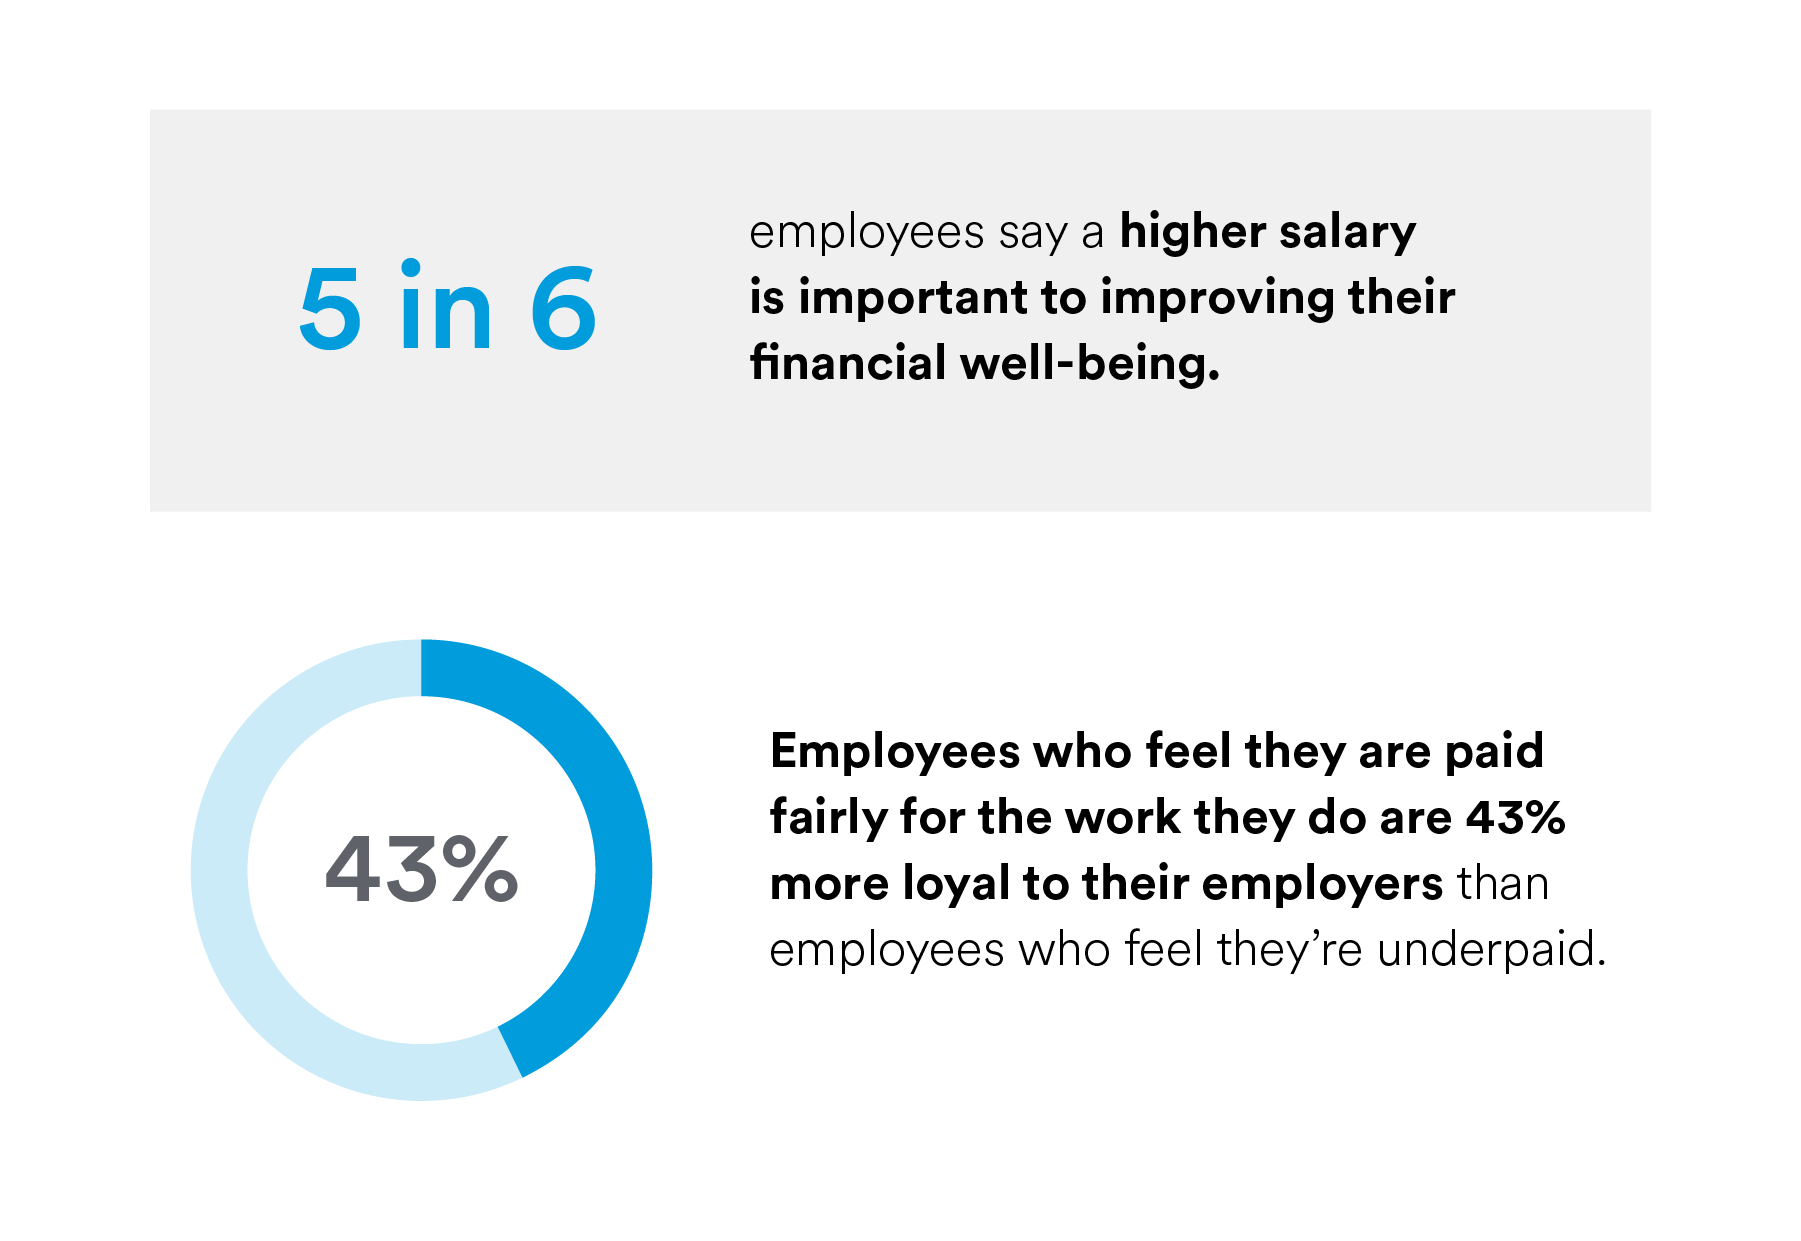 A majority of employees say a higher salary is important to improving their financial well-being. Being paid fairly for their work makes employees 43% more loyal to their employers, versus employees who feel underpaid. 